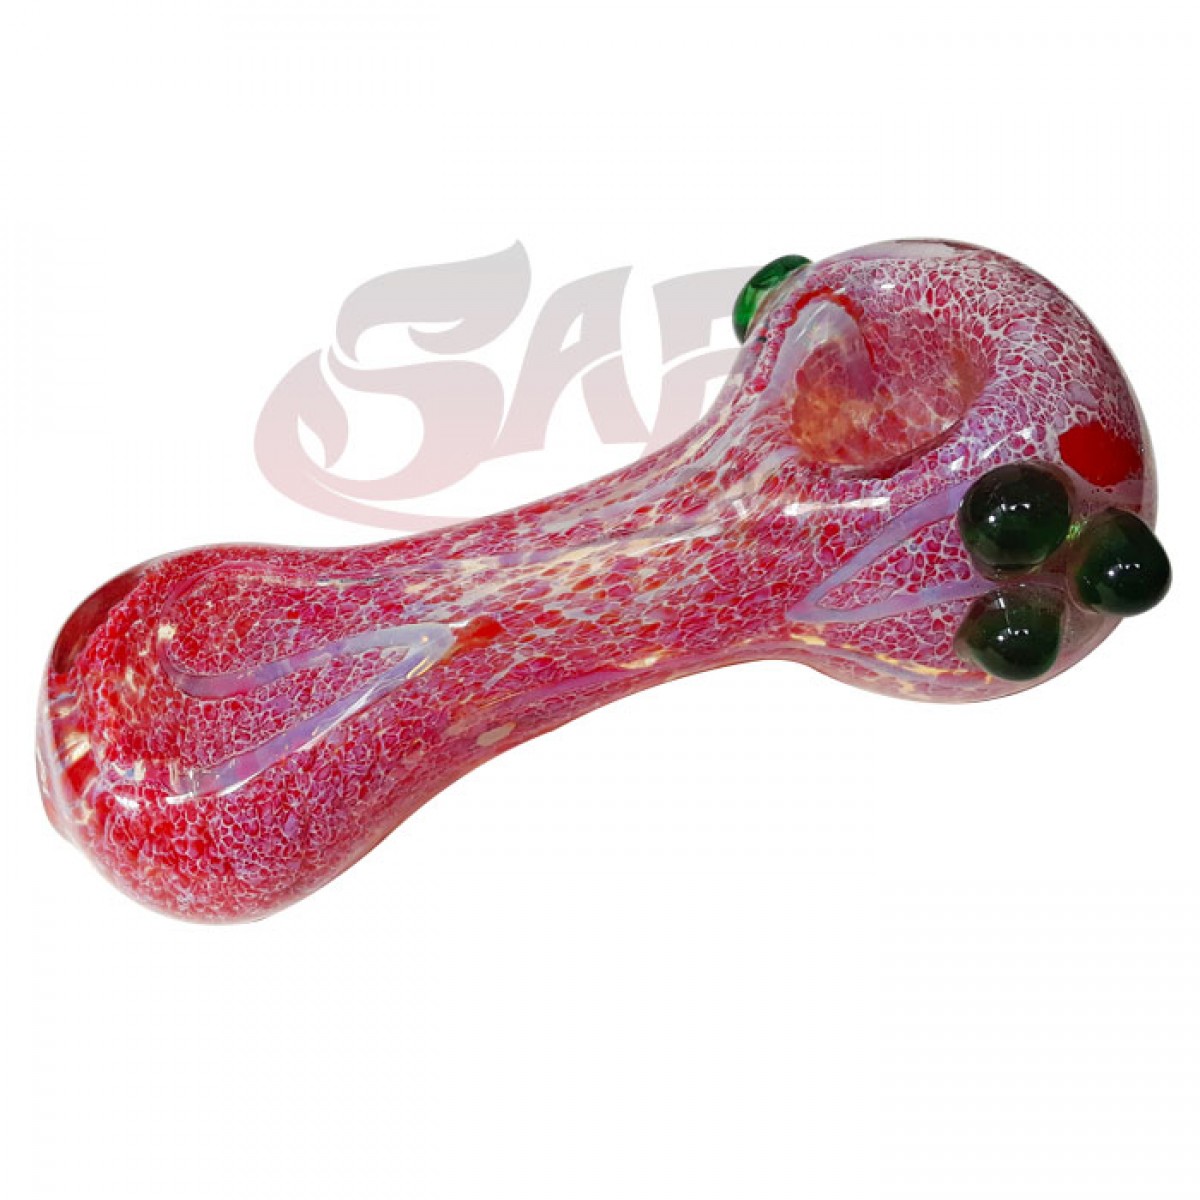 5 Inch Glass Hand Pipes - Frit/Linework